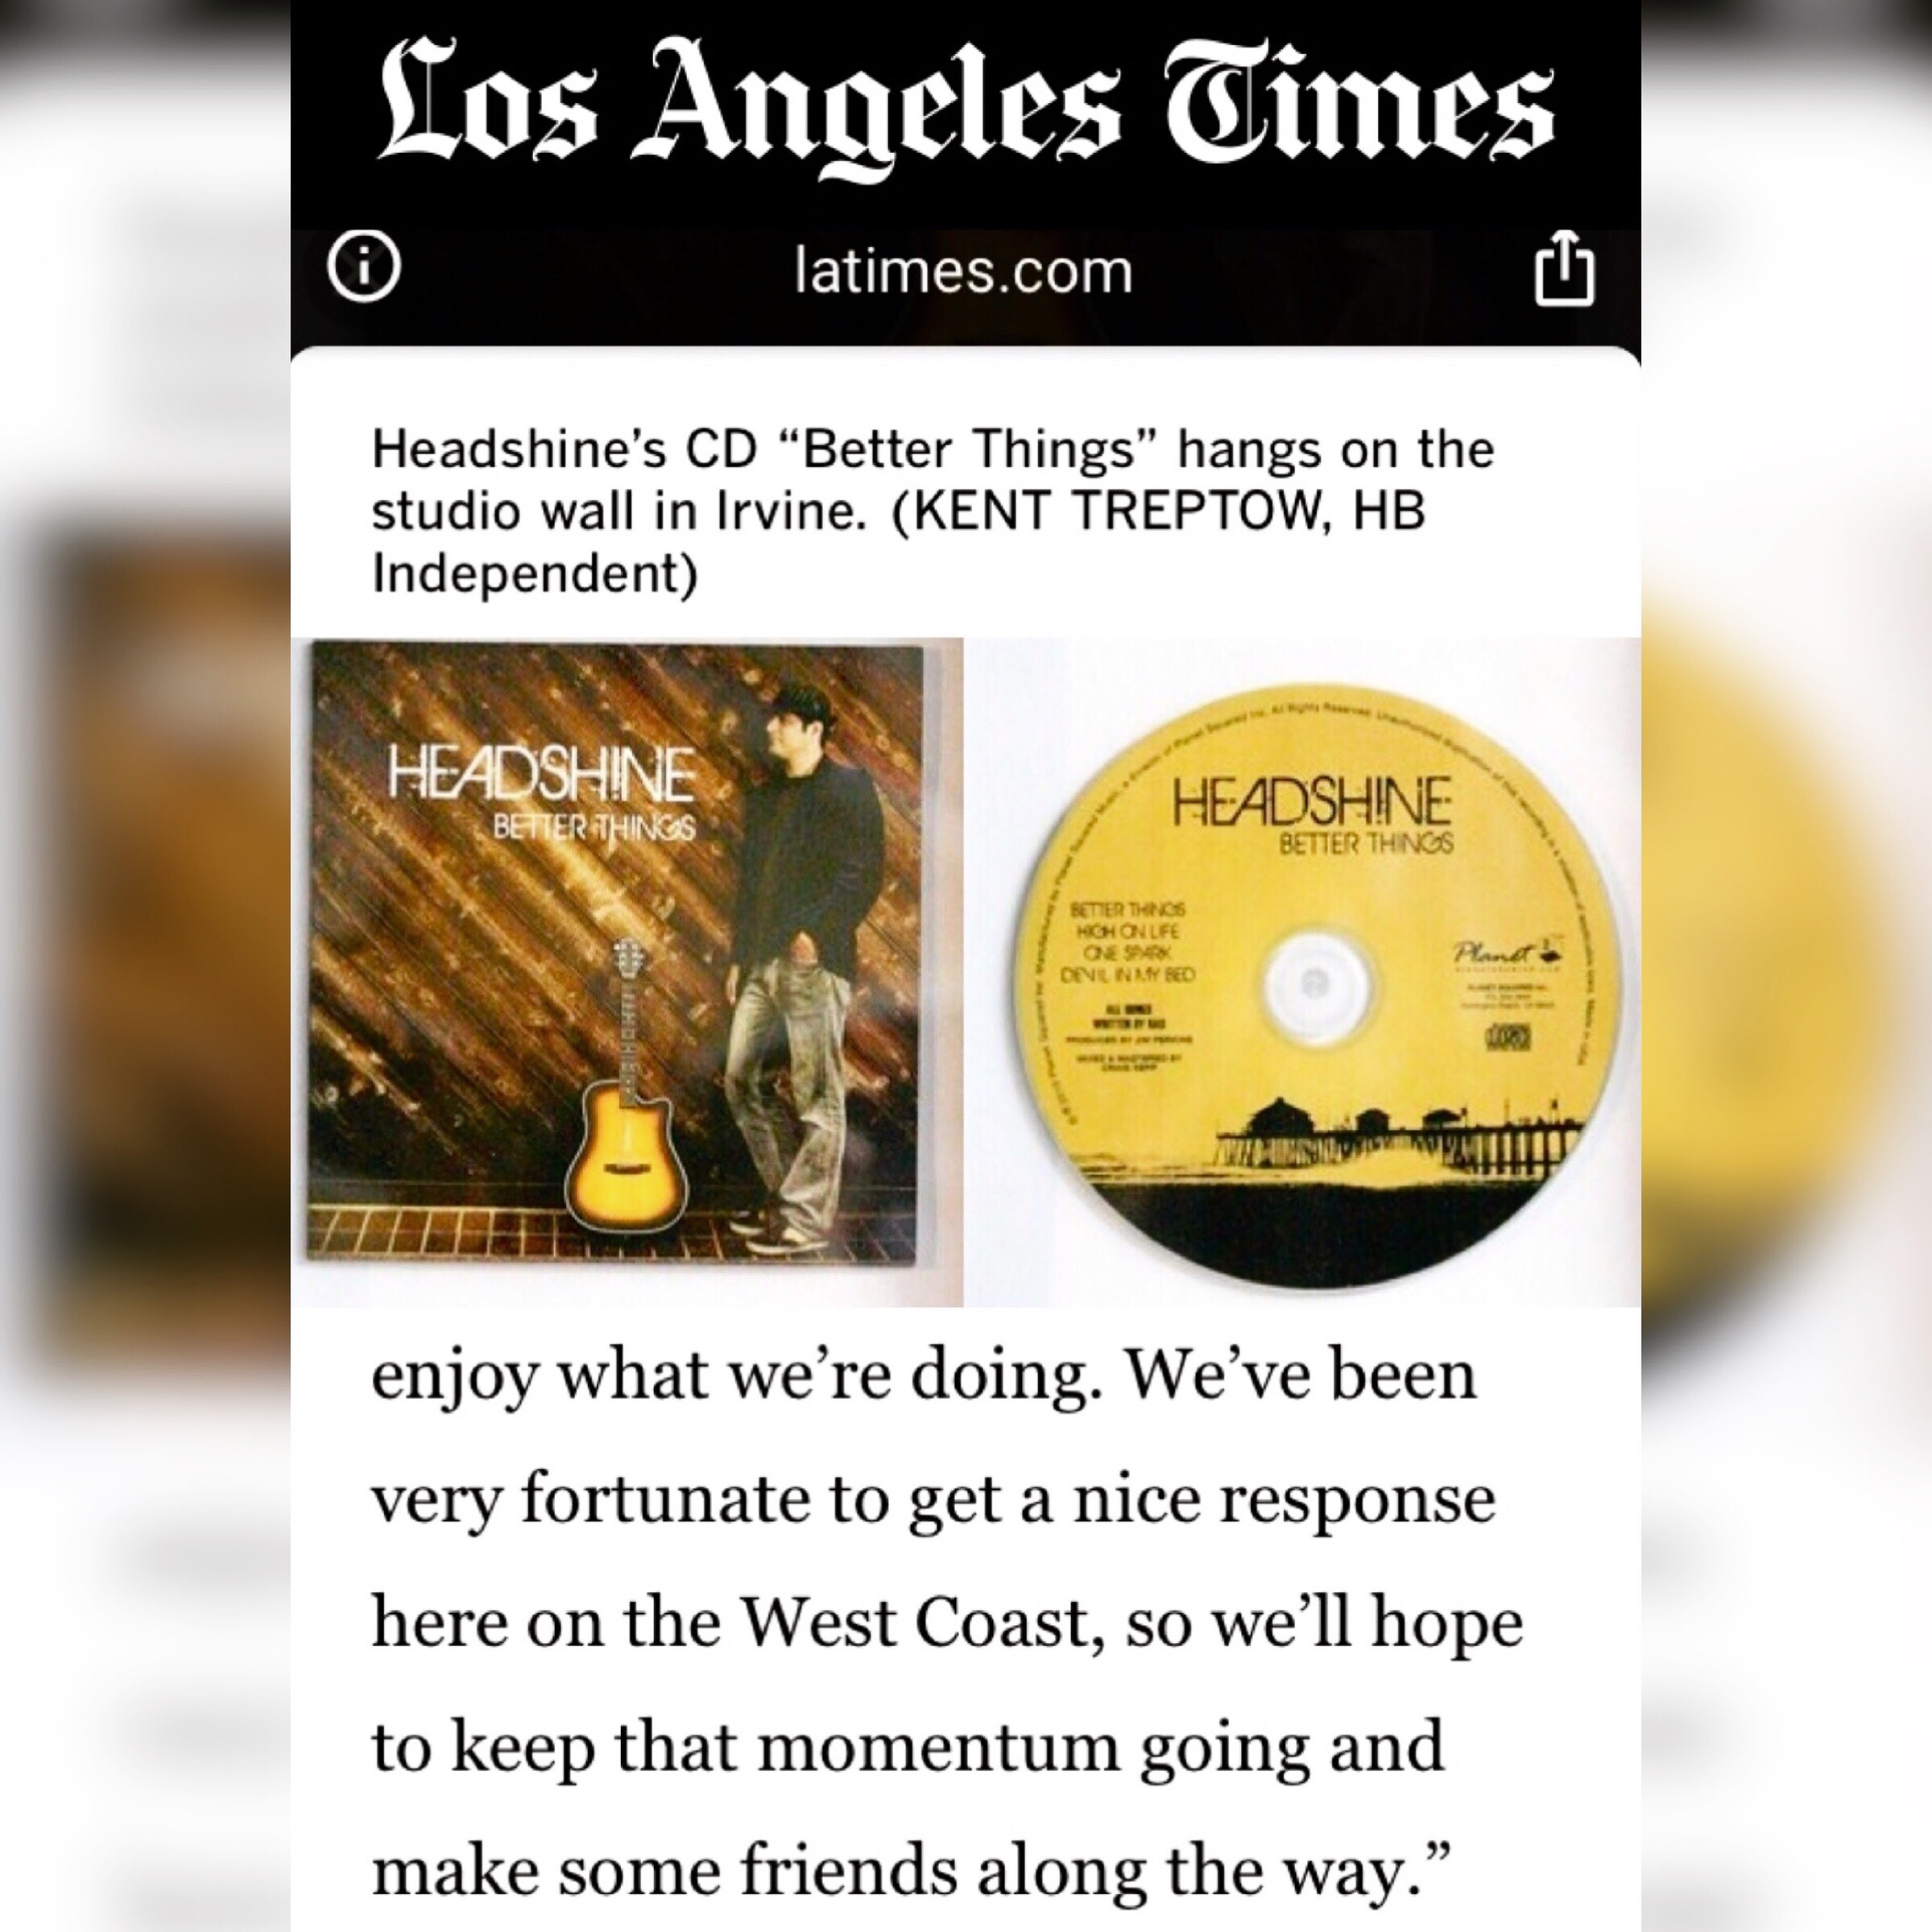 LA Times article features Better Things by Headshine